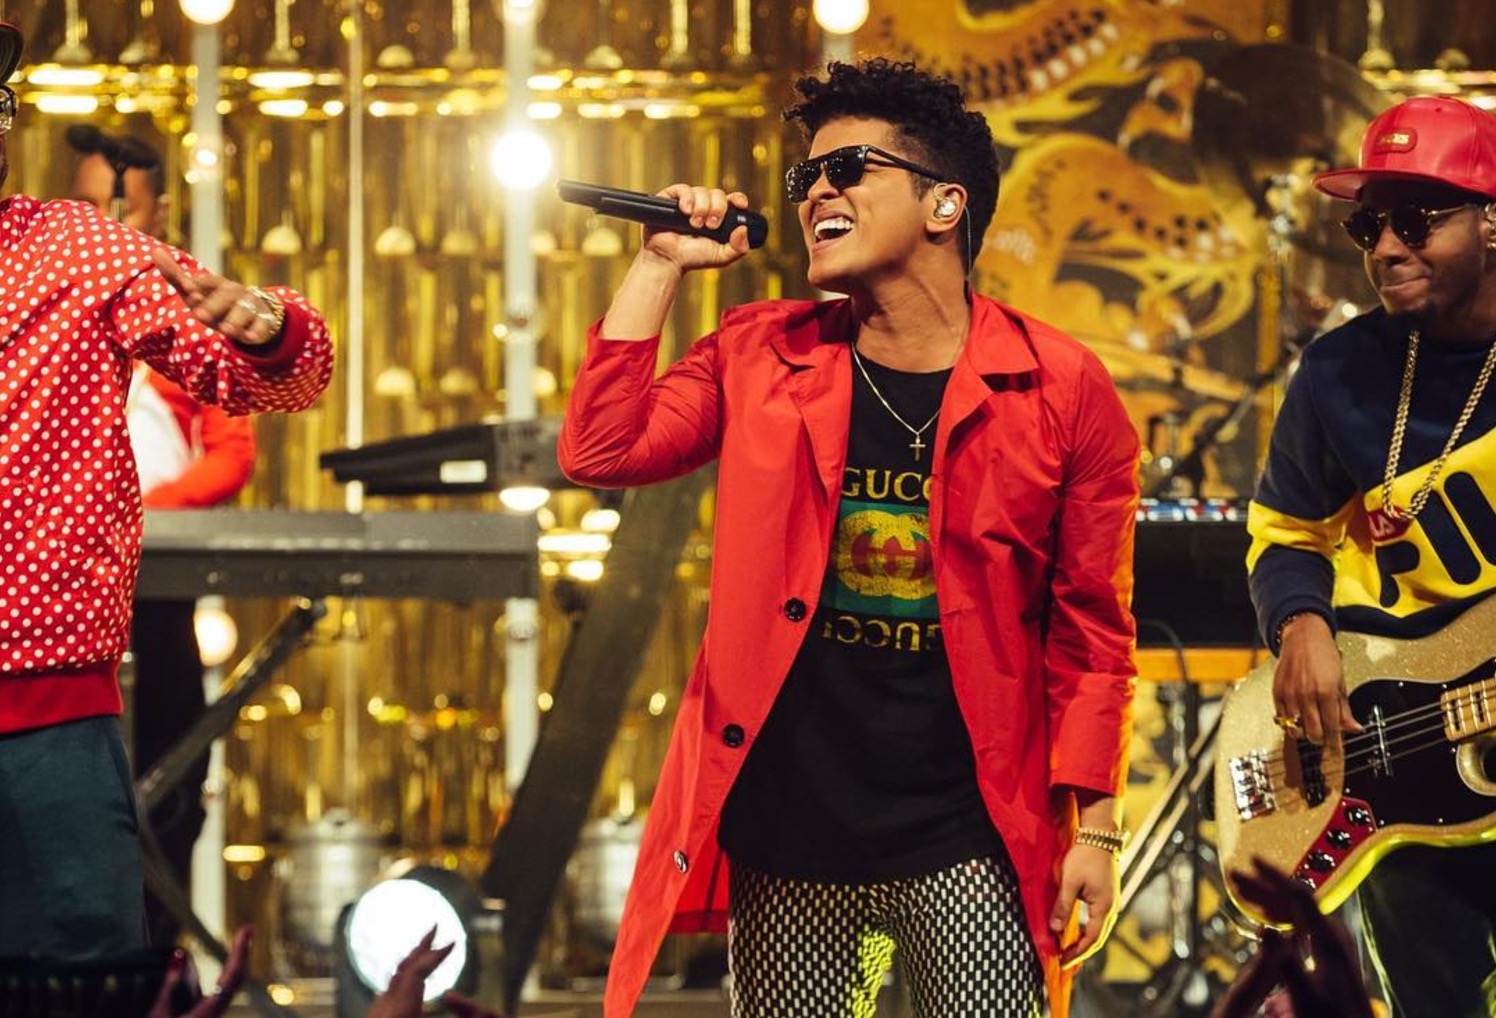 Here's how much you have to shell out to see Bruno Mars' 24K Magic Tour